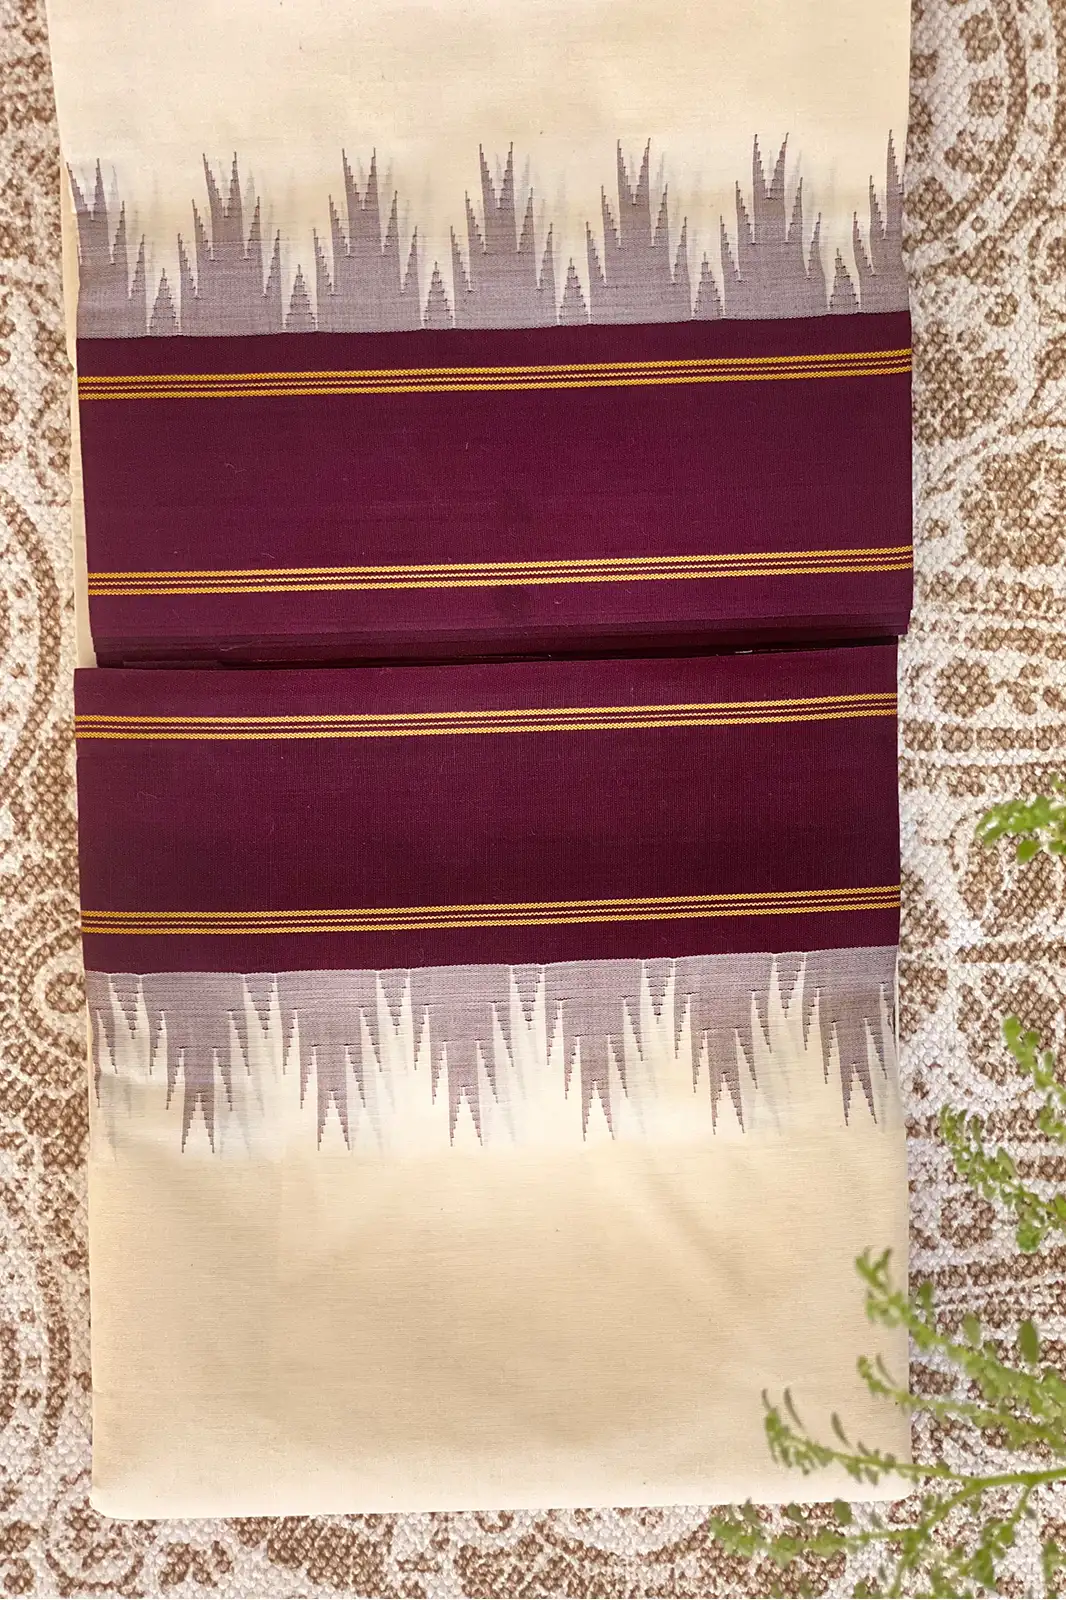 sodoh natural cotton dhoti, printed dhoti men's, indian traditional clothes shop, handloom cotton dhoti, cotton silk dhoti, best cotton dhoti, sepia stories, handloom cotton dhoti, cotton dhoti near me, cotton white dhoti, pure cotton dhoti price, organic cotton dhoti, best cotton dhoti, cotton white dhoti, cotton dhoti for pooja, cotton readymade dhoti, organic cotton dhoti, green cotton dhoti pants, dhoti traditional, organic cotton dhoti, readymade dhoti price, men's pattu dhoti, printed dhoti kurta, printed cotton dhoti pants, printed dhoti men's, printed dhoti style dress, Indian traditional clothes, indian traditional clothes shop, sustainable clothing brand, handwoven men clothing, handmade men clothing store,